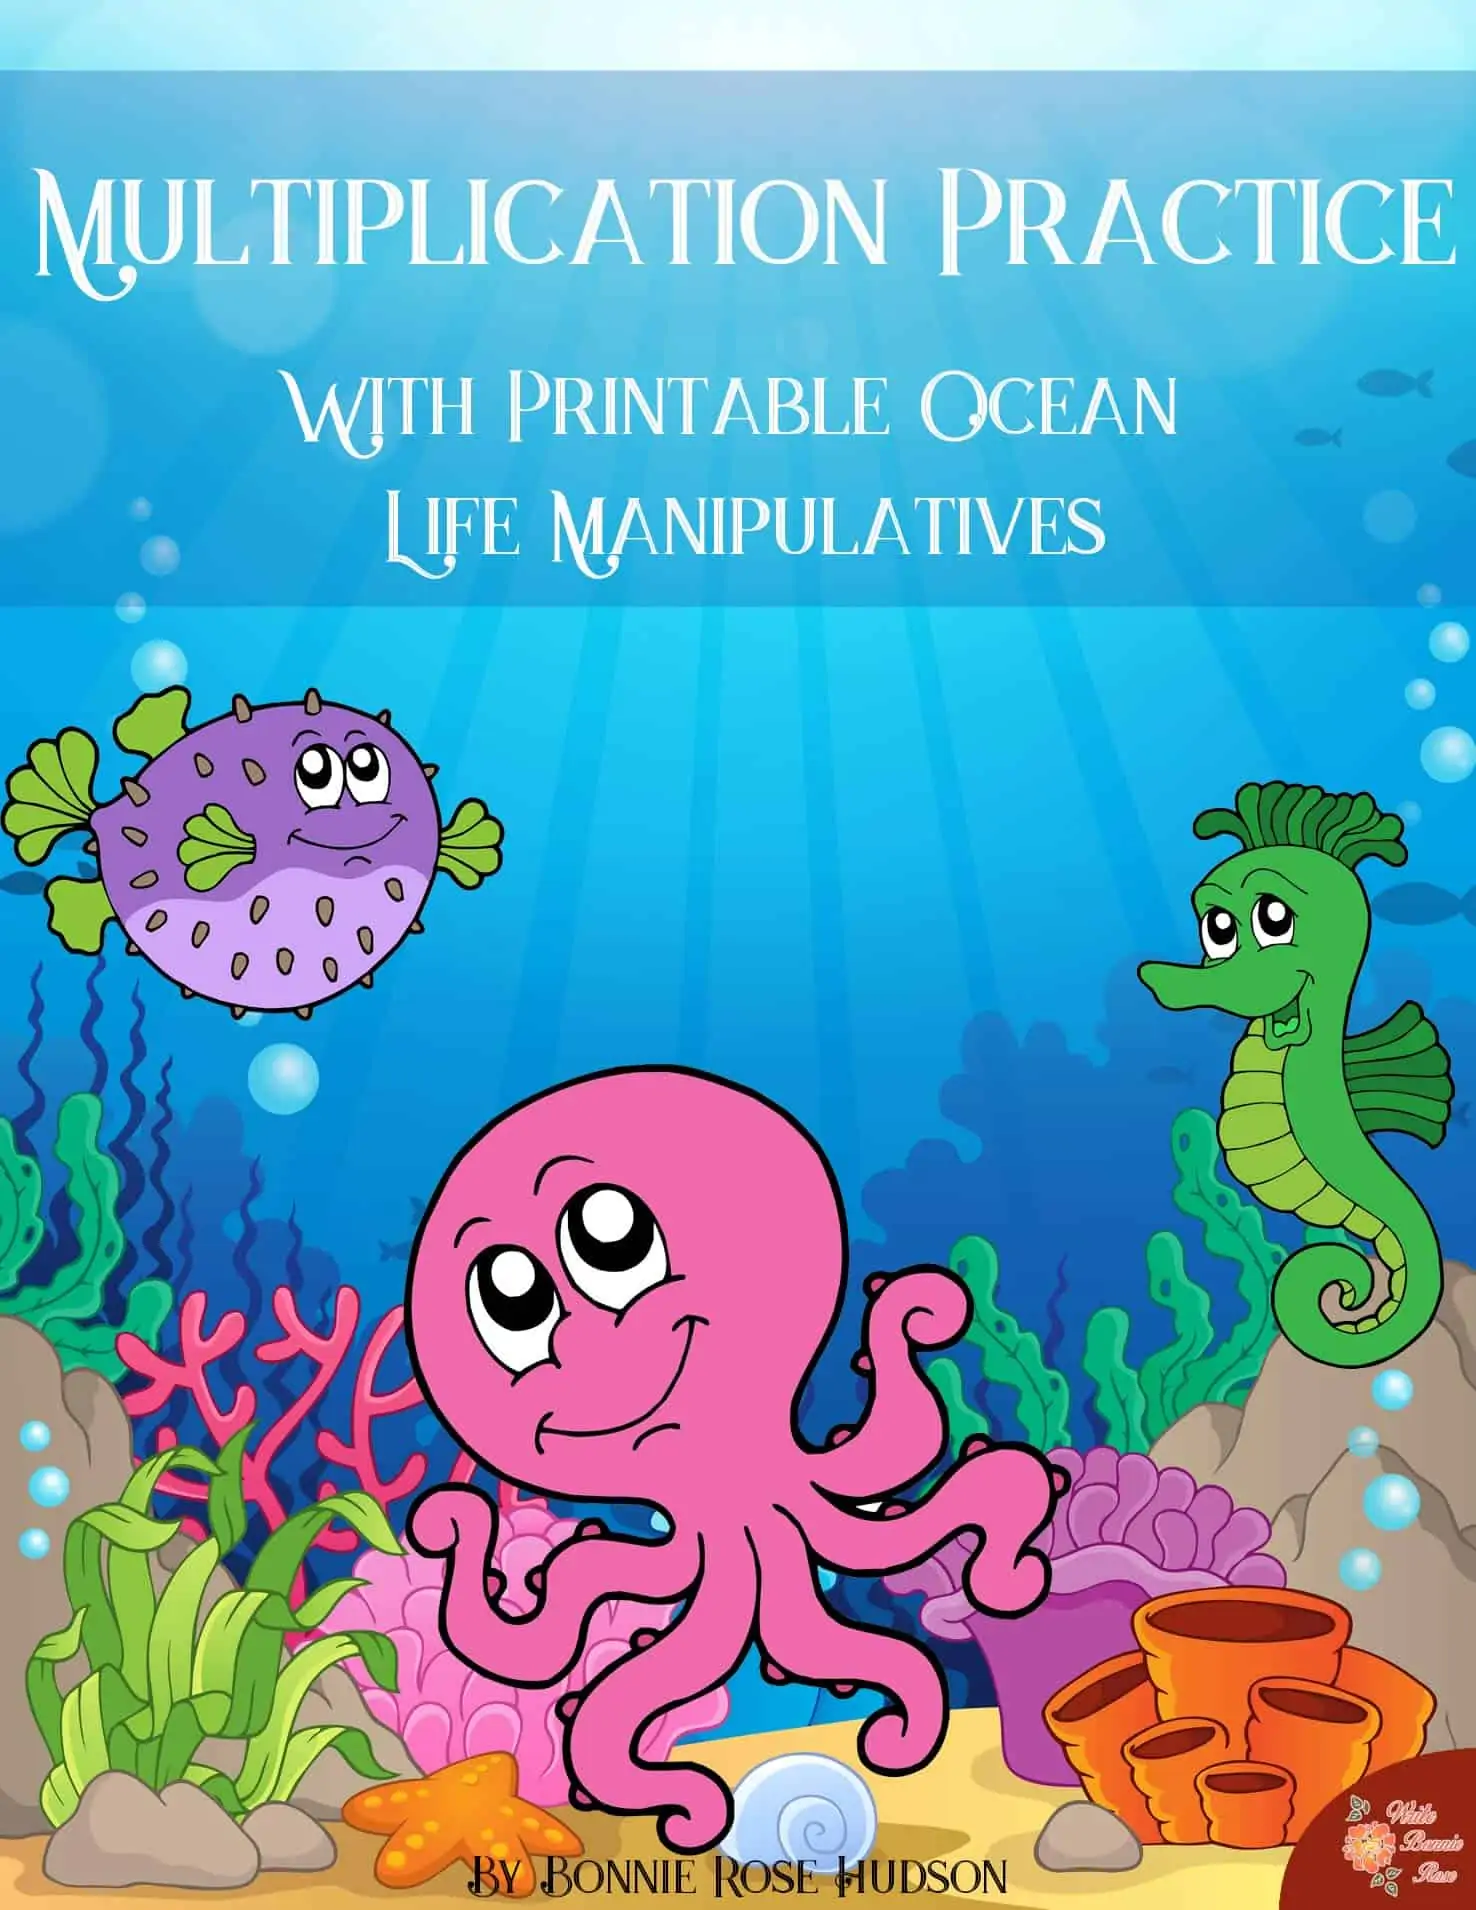 Multiplication Practice text with illustrated background of underwater life